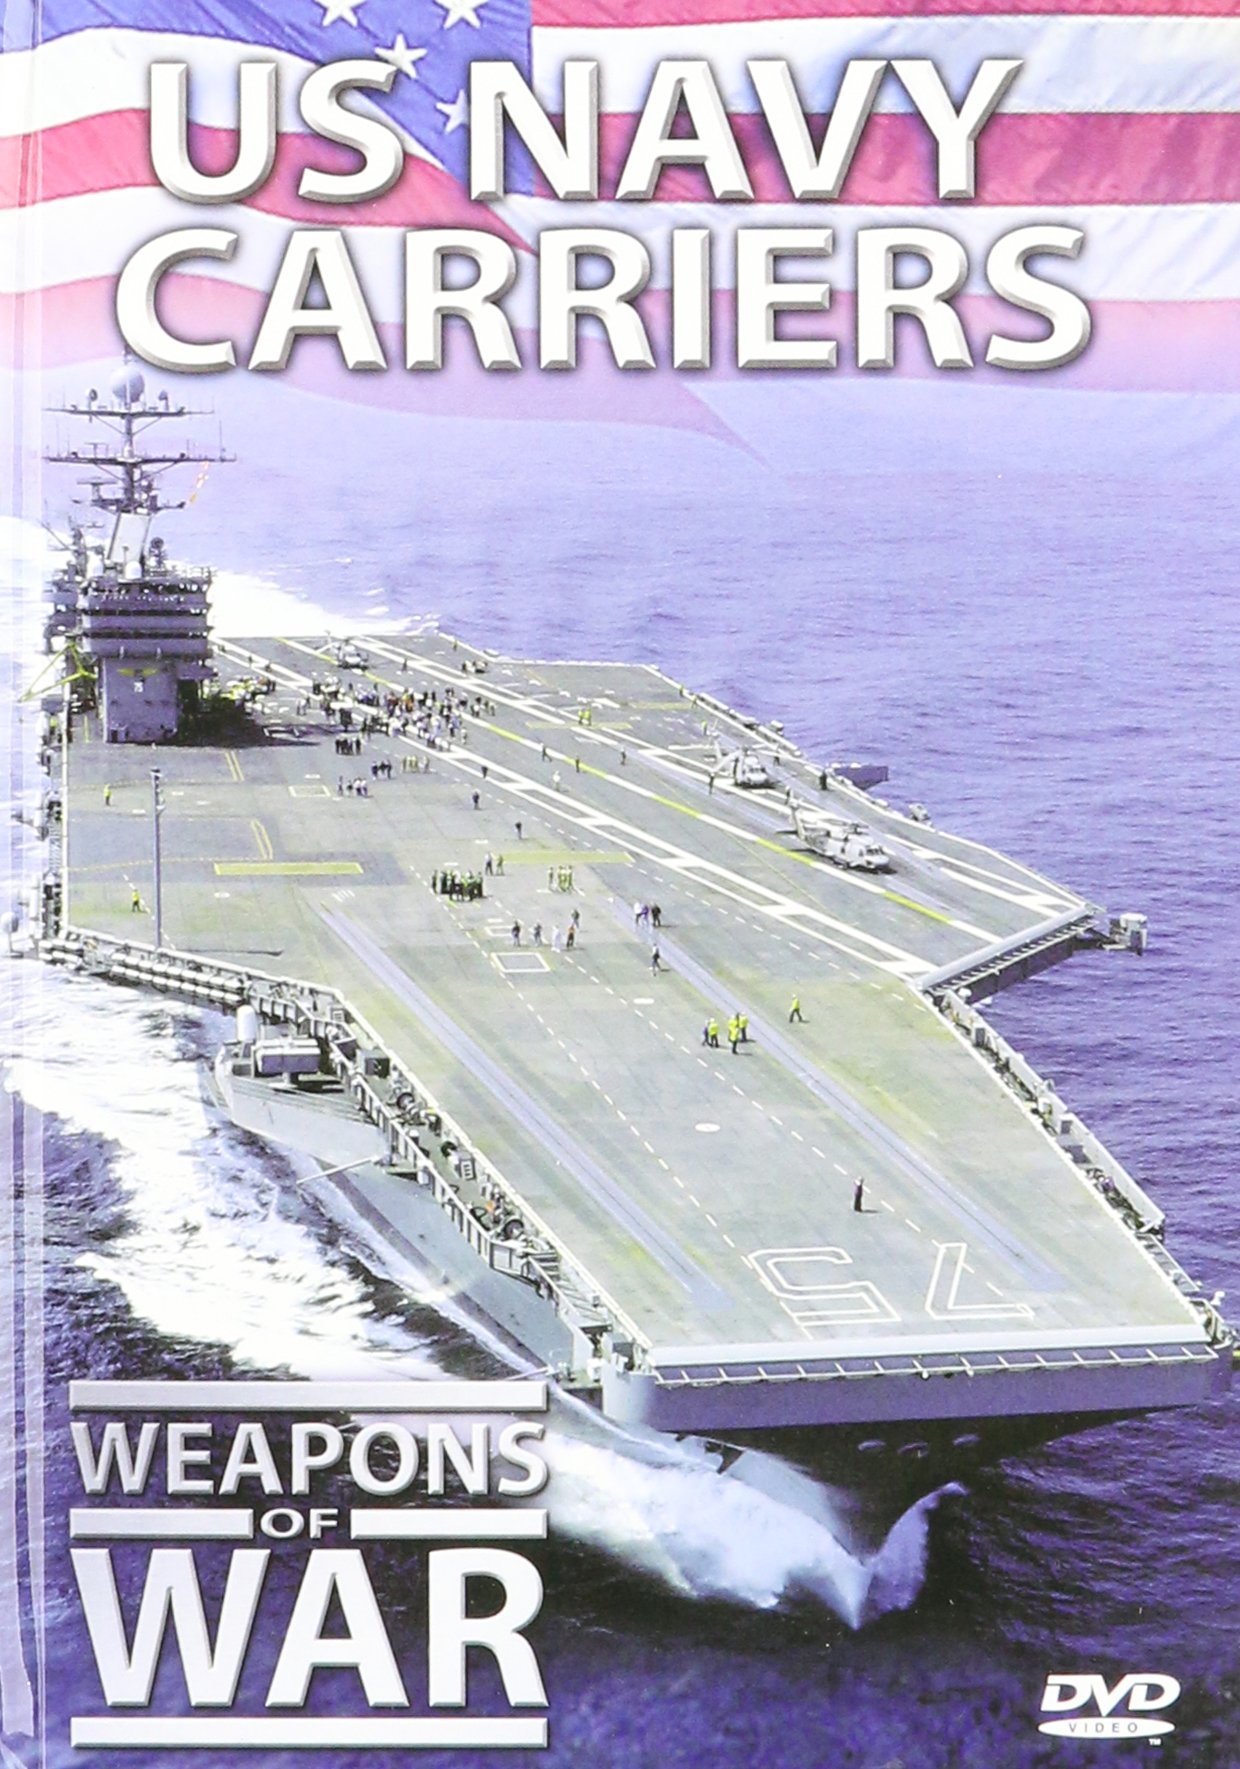 US Navy carriers : Weapons of War